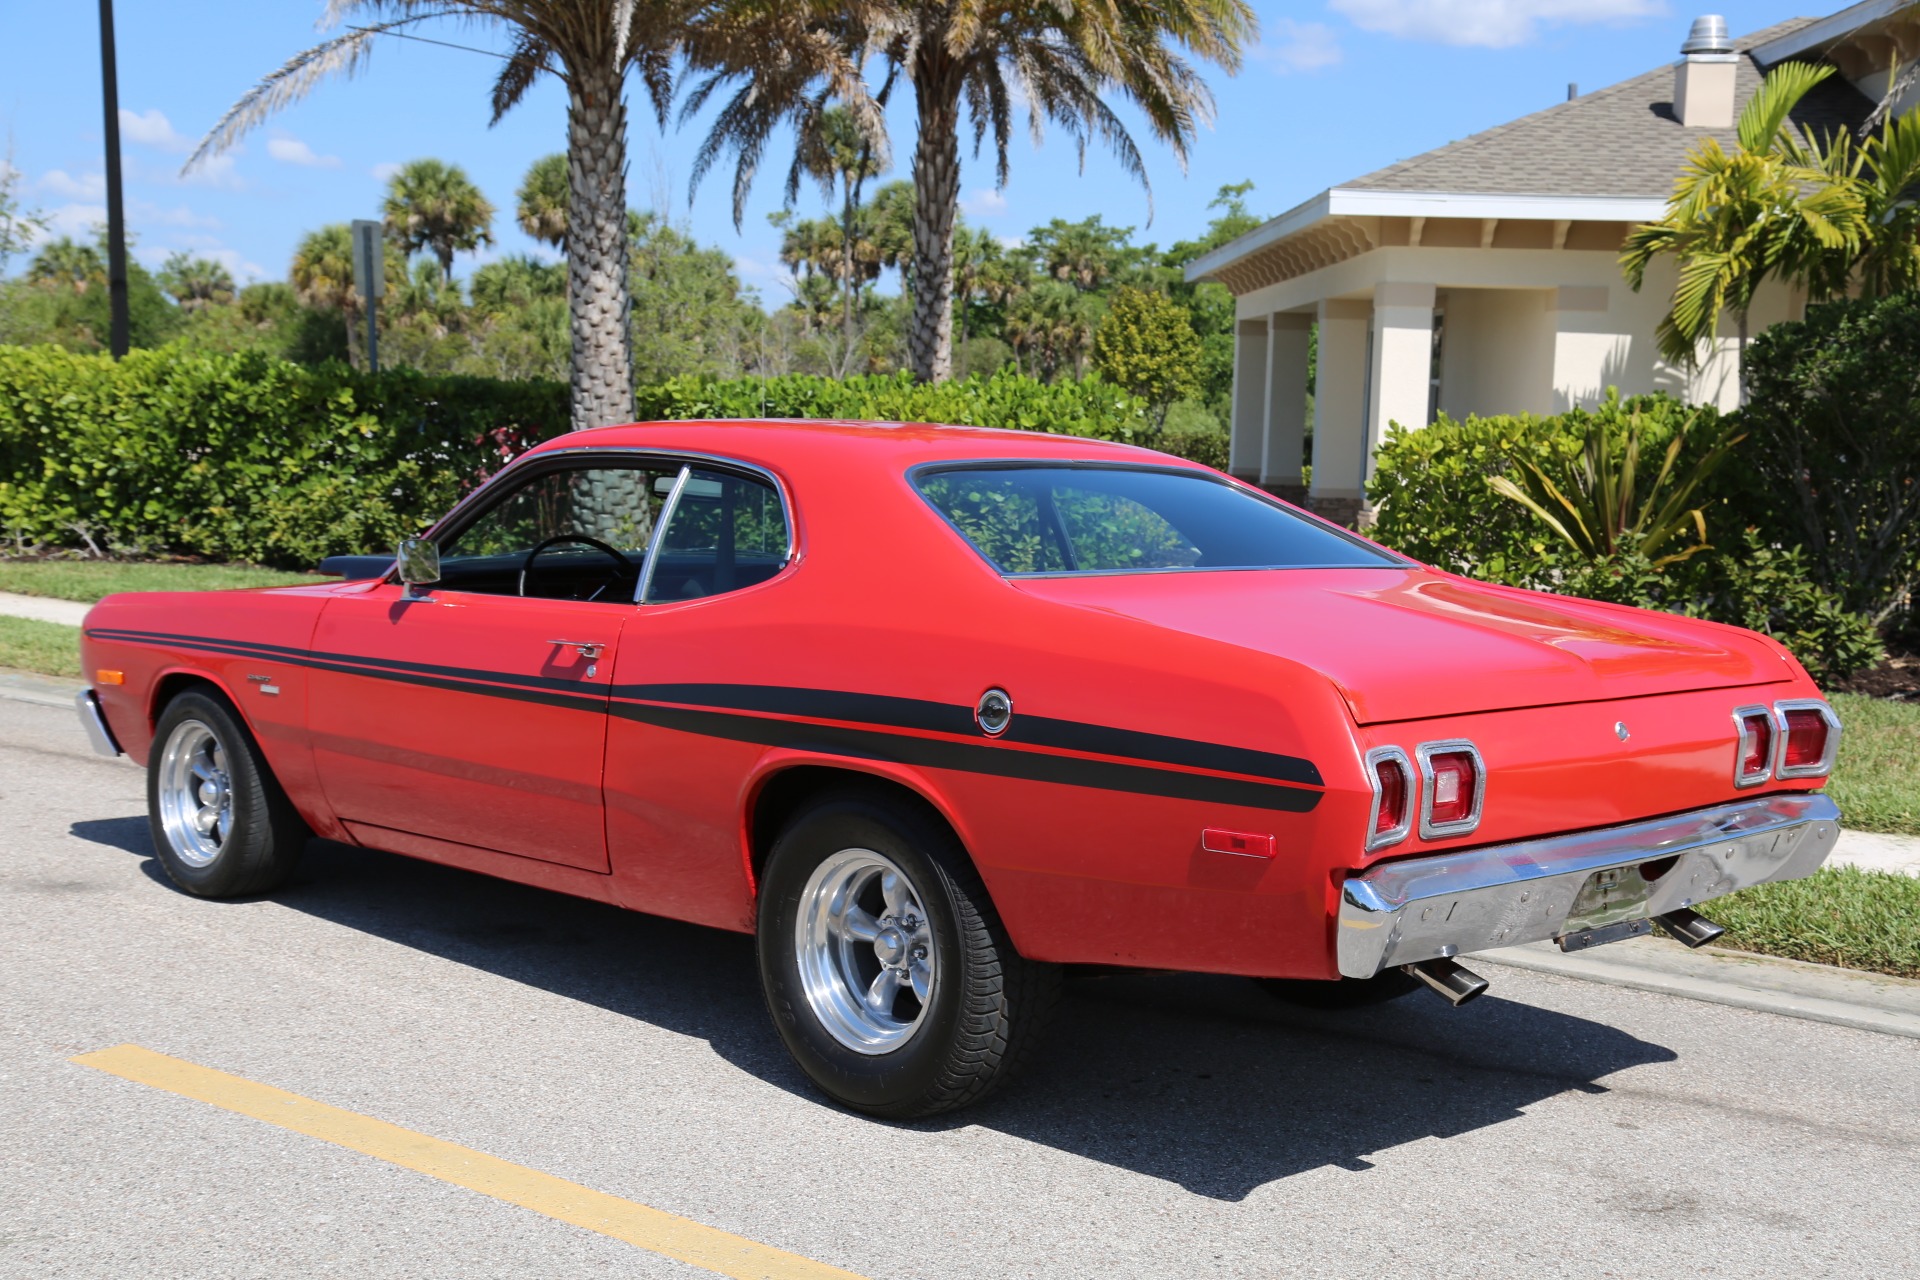 Used 1973 Dodge Dart Dart V8 Auto for sale Sold at Muscle Cars for Sale Inc. in Fort Myers FL 33912 8